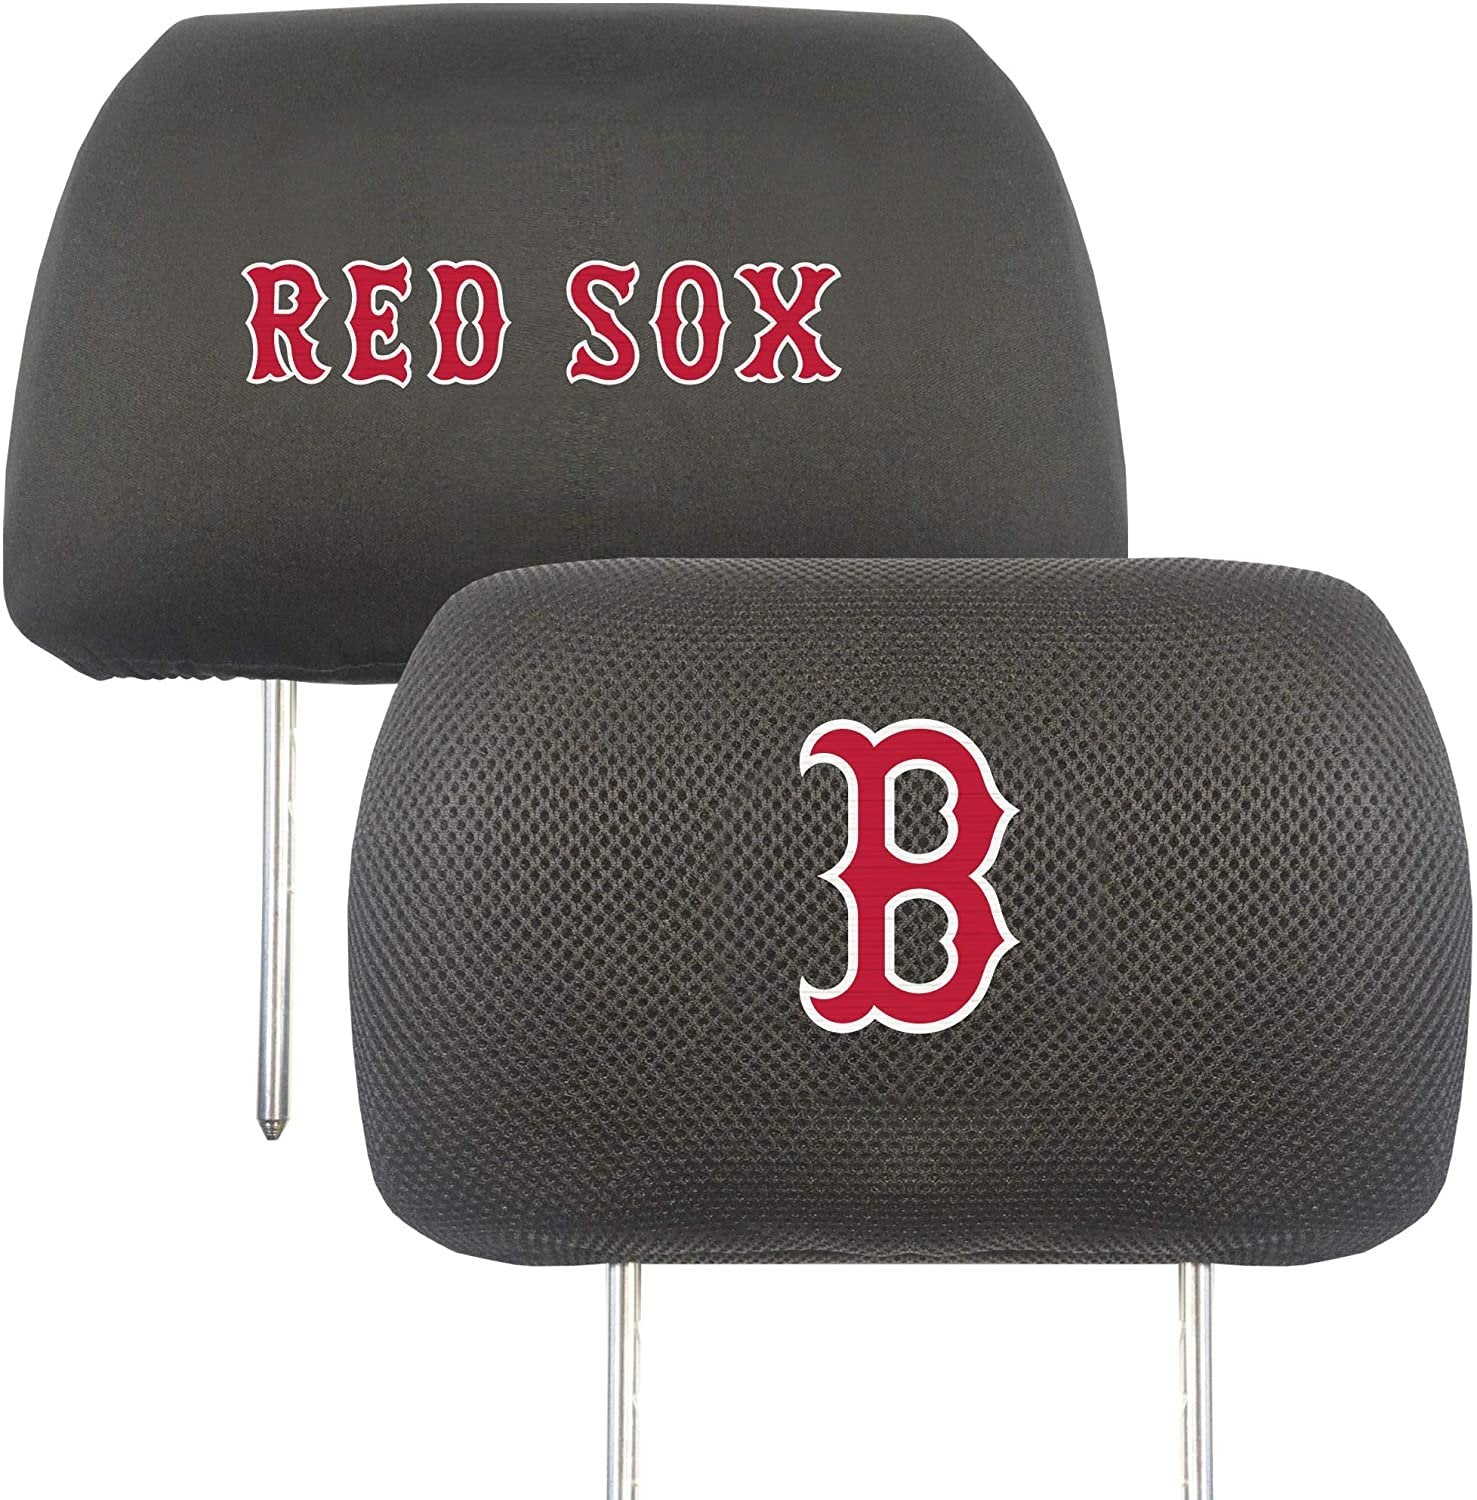 Boston Red Sox Pair of Premium Auto Head Rest Covers, Embroidered, Black Elastic, 14x10 Inch